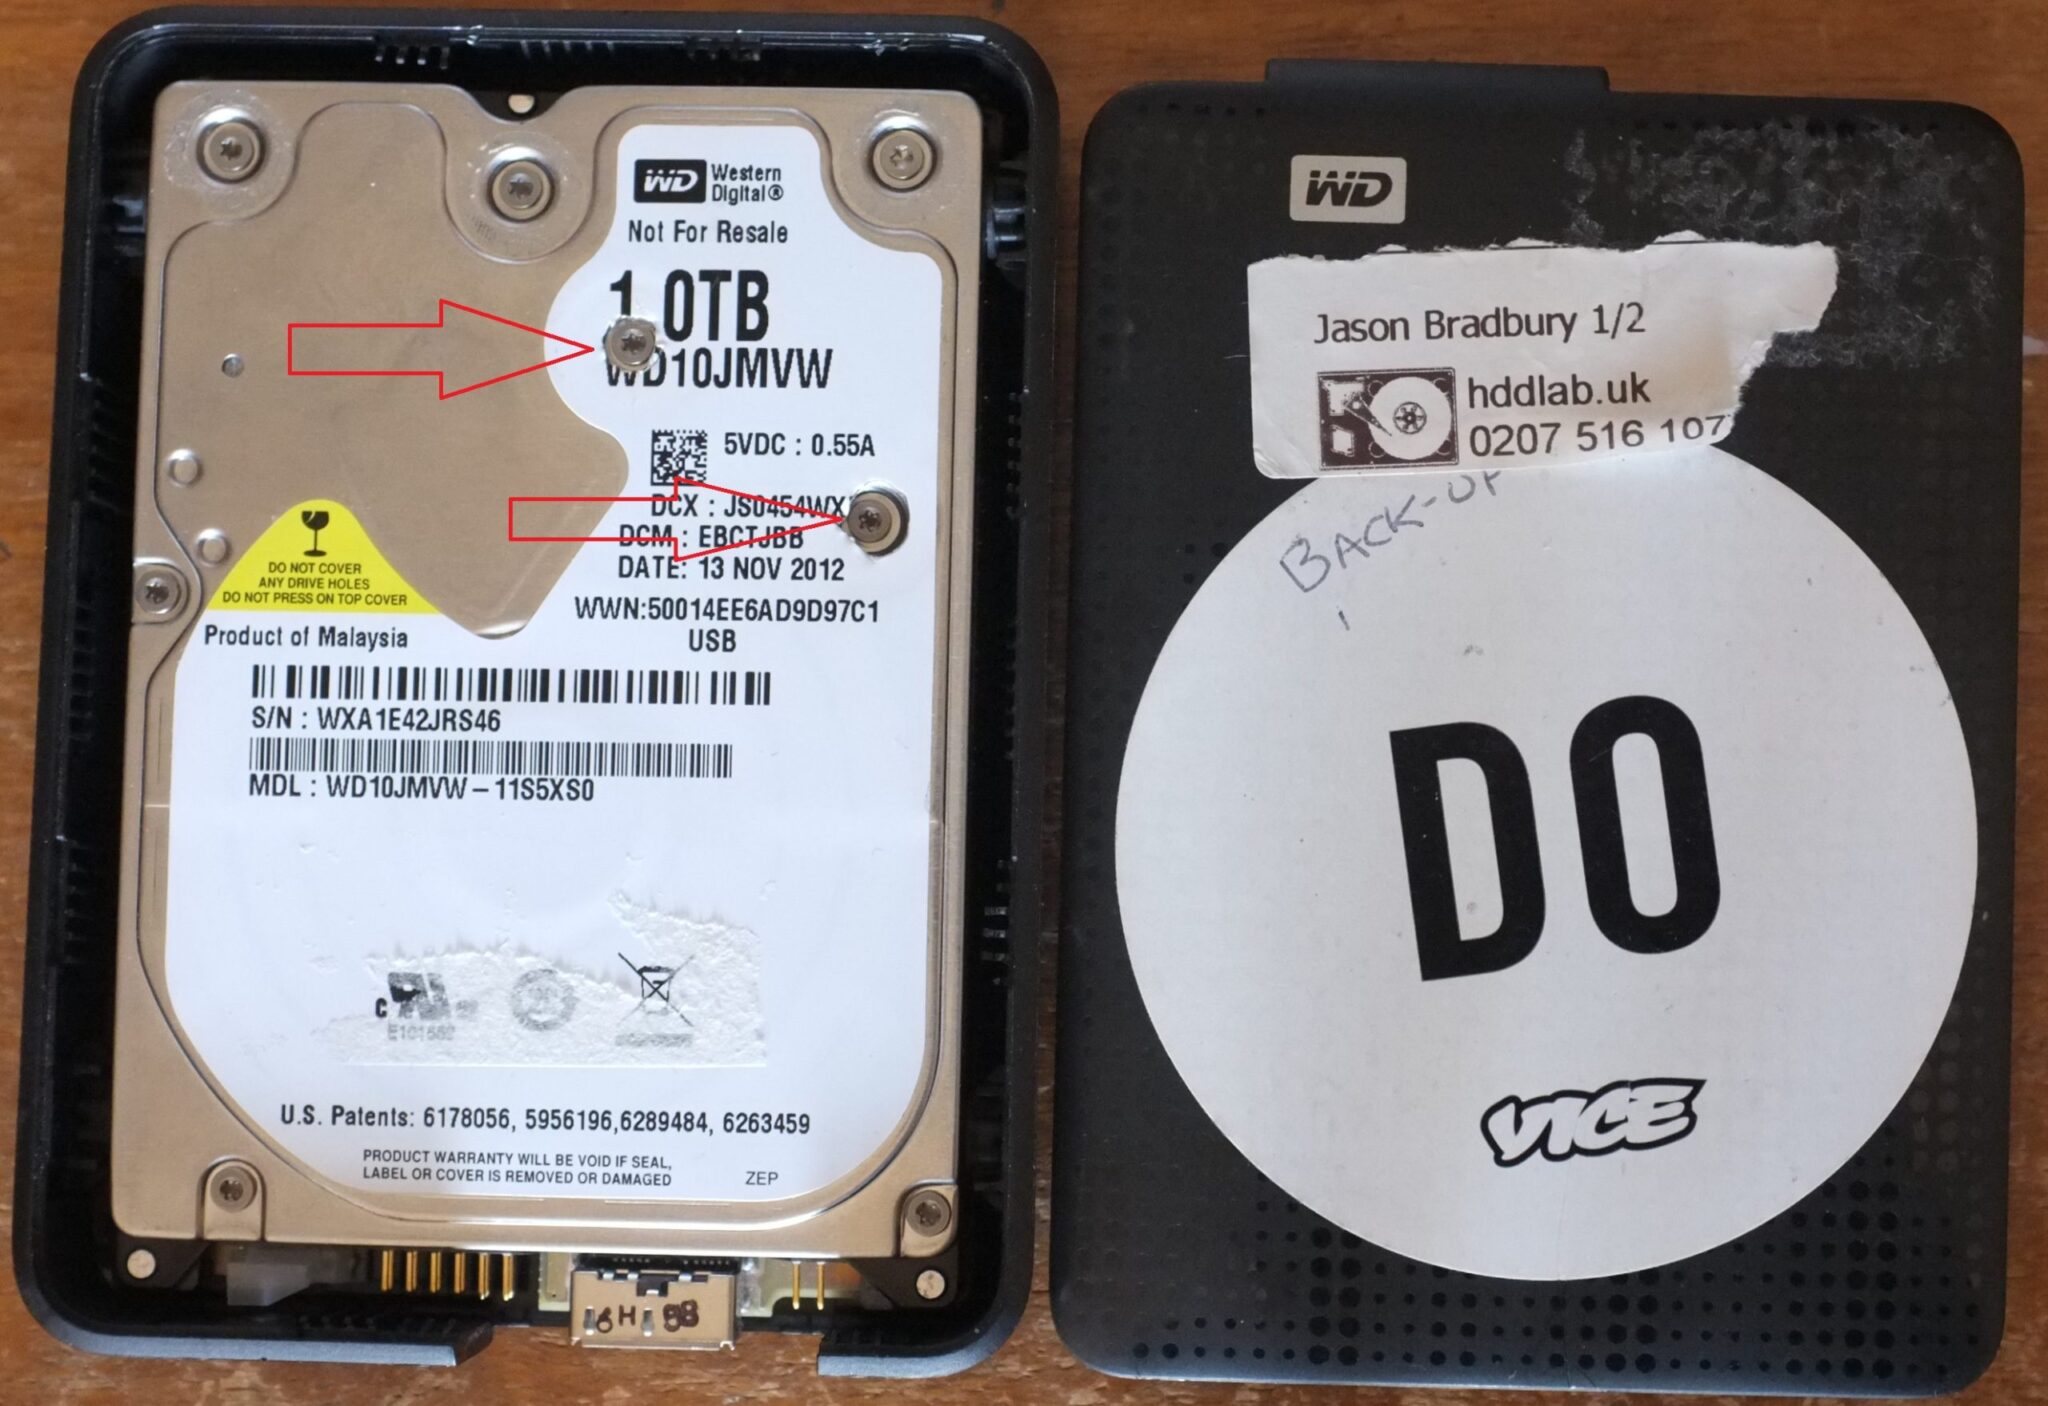 Previously Handled HDD HDDlab. WD10JMVW-11S5XS0